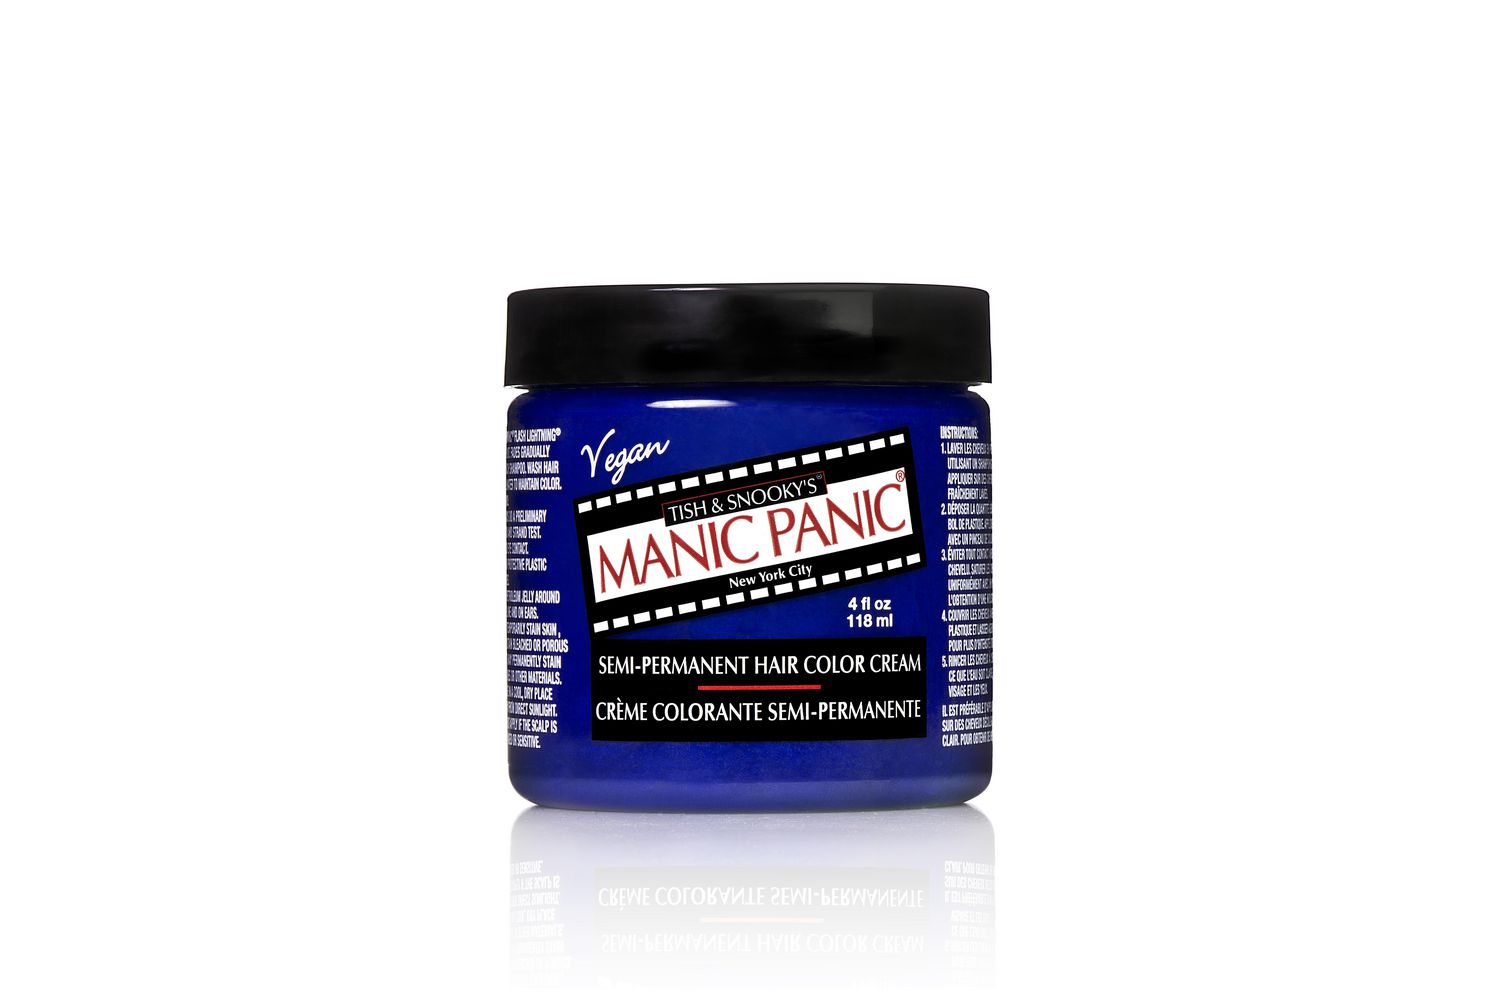 4. Manic Panic Amplified Semi-Permanent Hair Color - After Midnight - wide 6